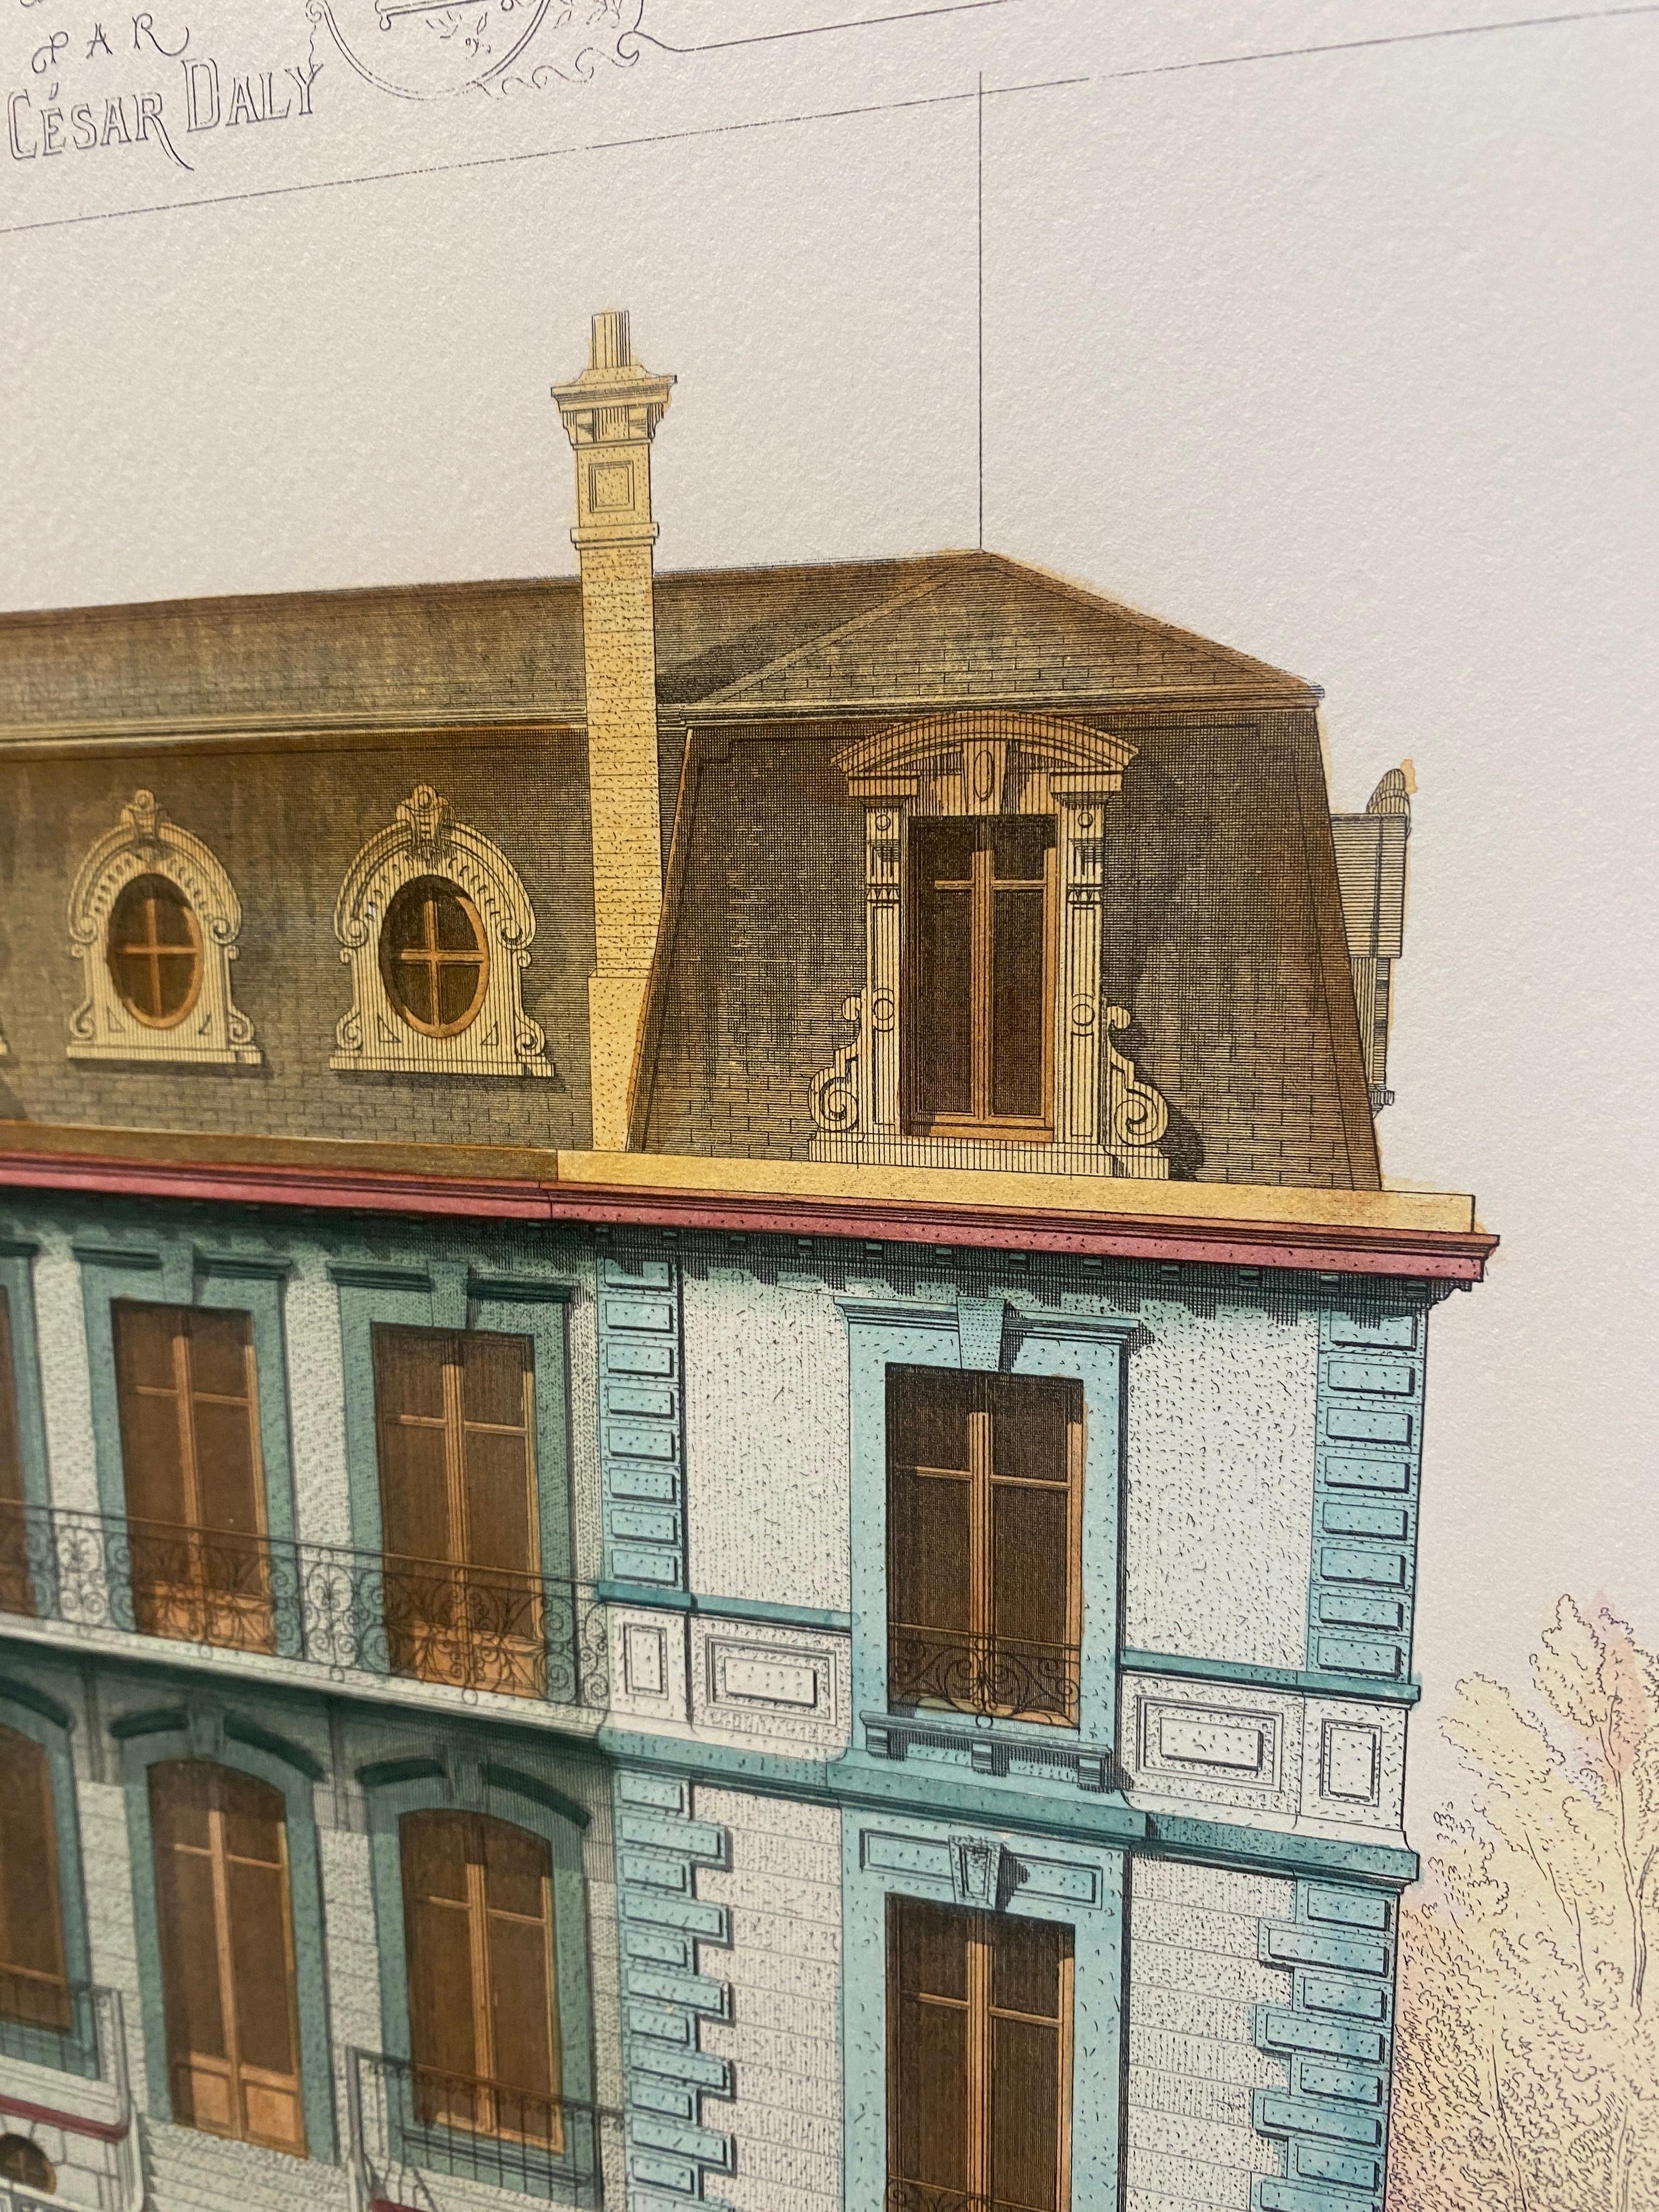 Italian French Architecture Priveè by Cesar Daly Hand Painted Print 1 of 2 For Sale 1